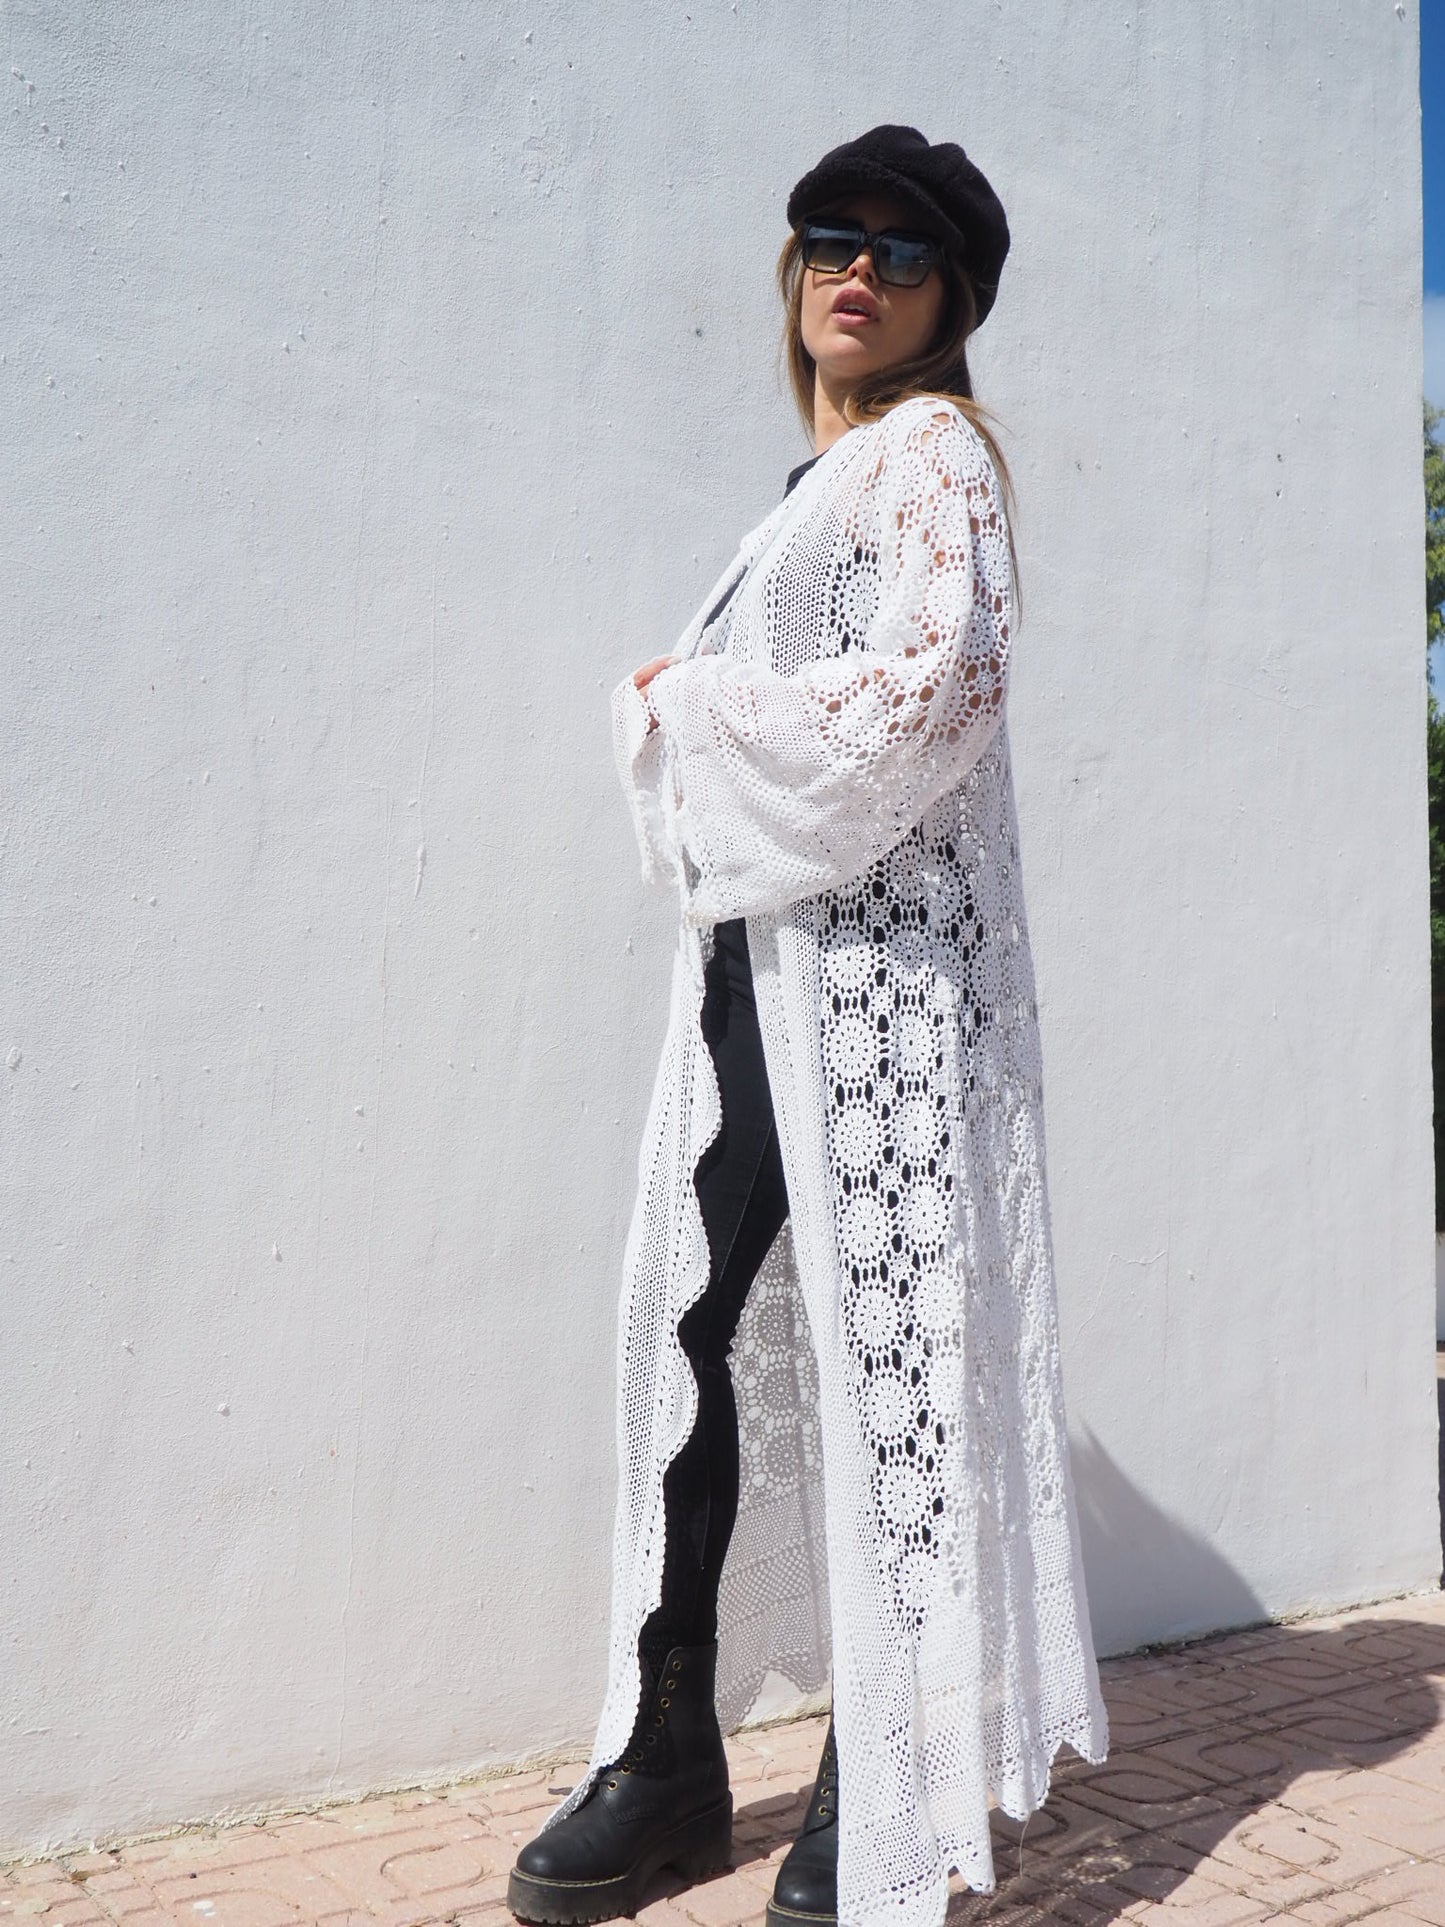 Vintage 1970’s French white crochet lace up-cycled jacket by Vagabond Ibiza